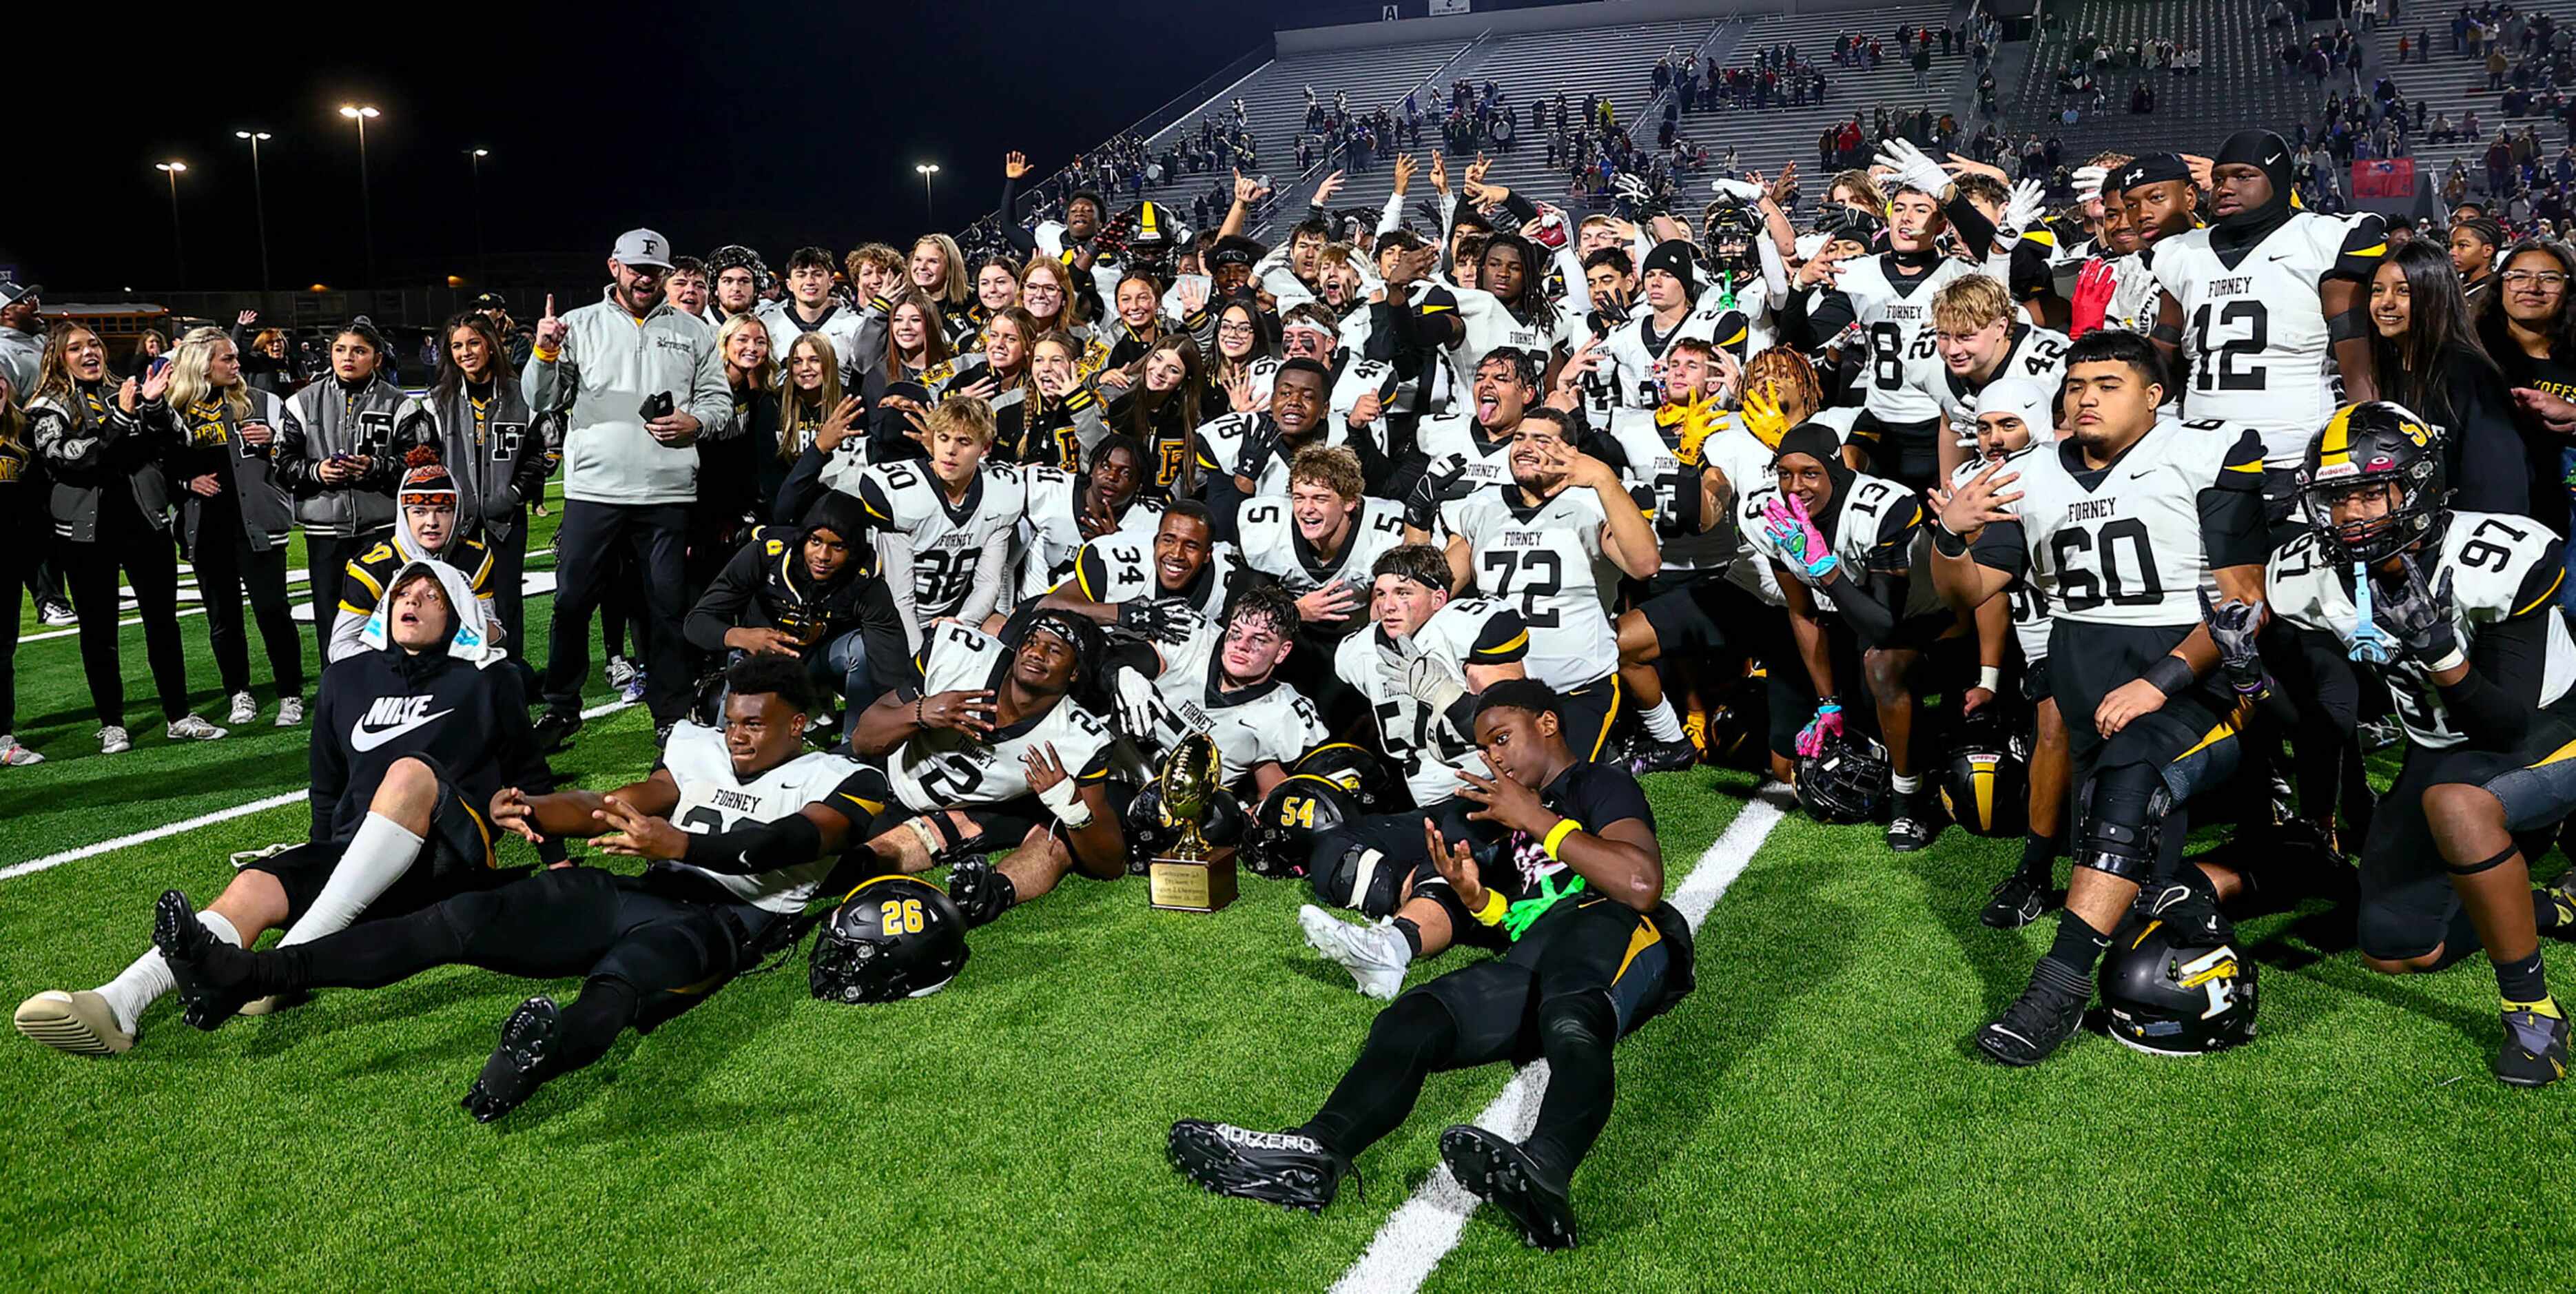 The Forney Jackrabbits celebrate their victory over Richland, 61-40 in the Class 5A Division...